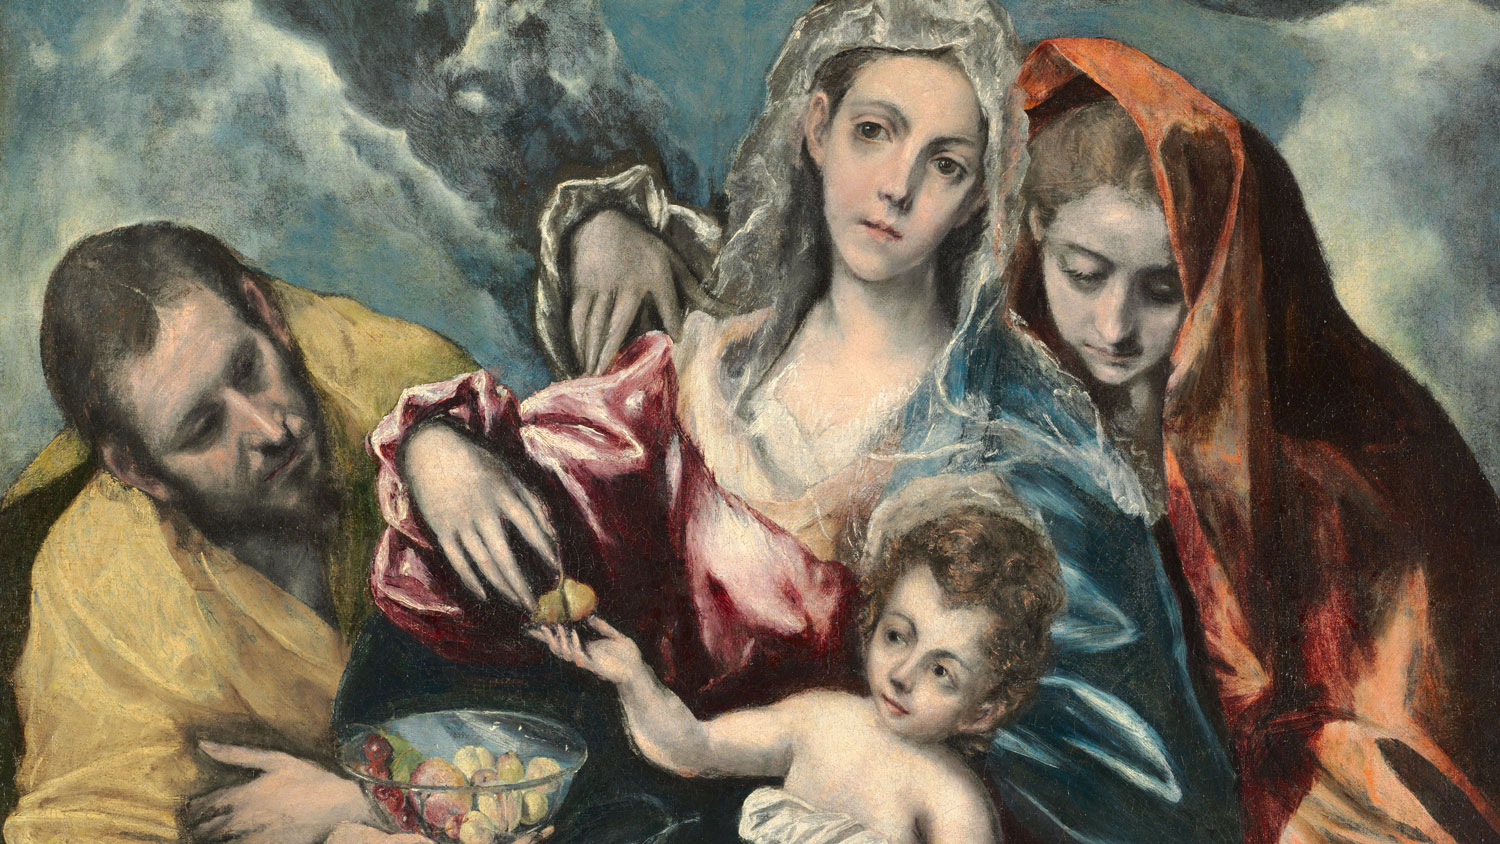 Painting of Mary holding Jesus surrounded by Joseph on the left holding a bowl of fruit and Mary Magdalen on the right looking sadly down at baby Jesus